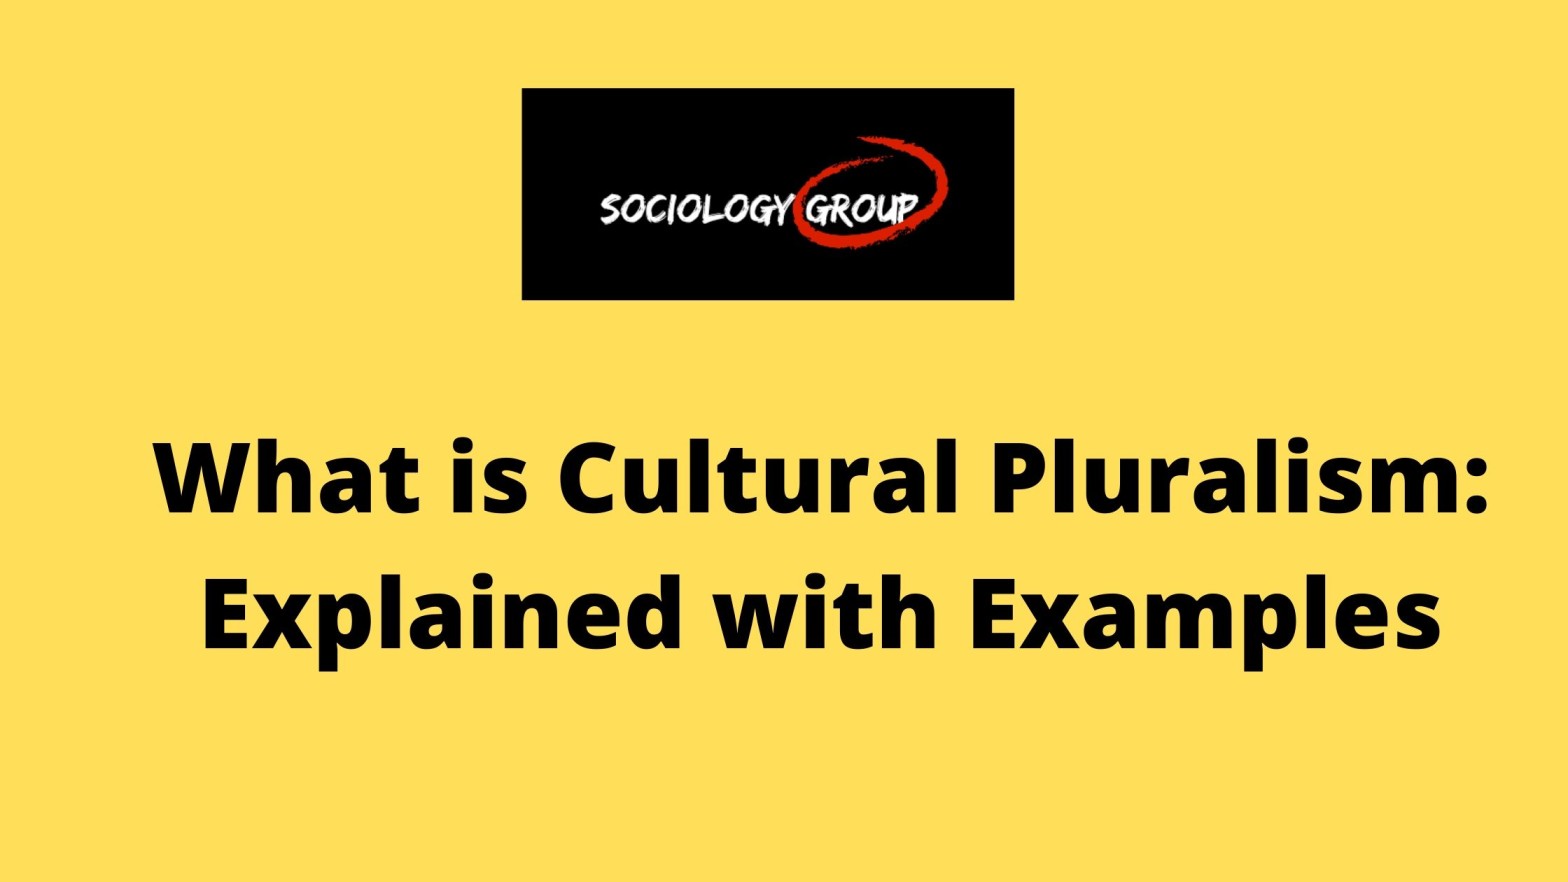 What is Cultural Pluralism